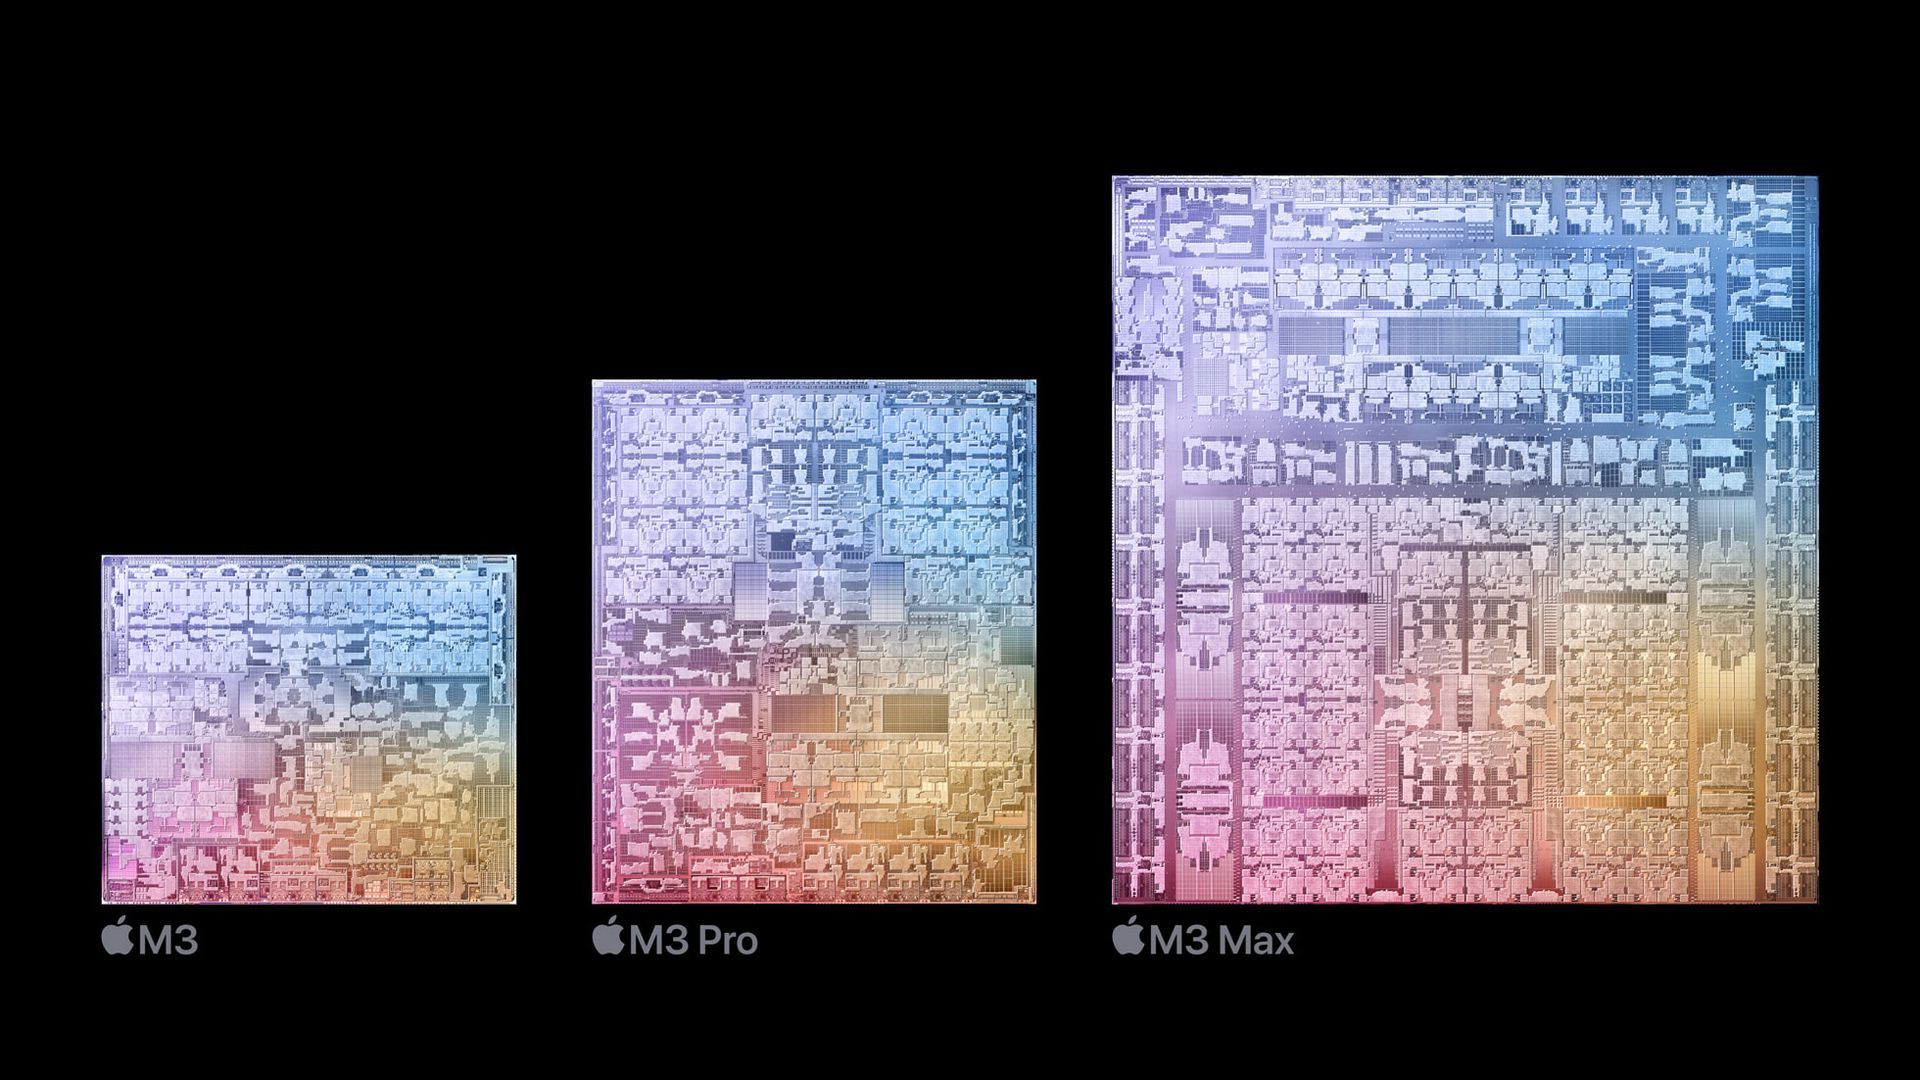 M3, M3 Pro and M3 Max: Apple's new chips explained